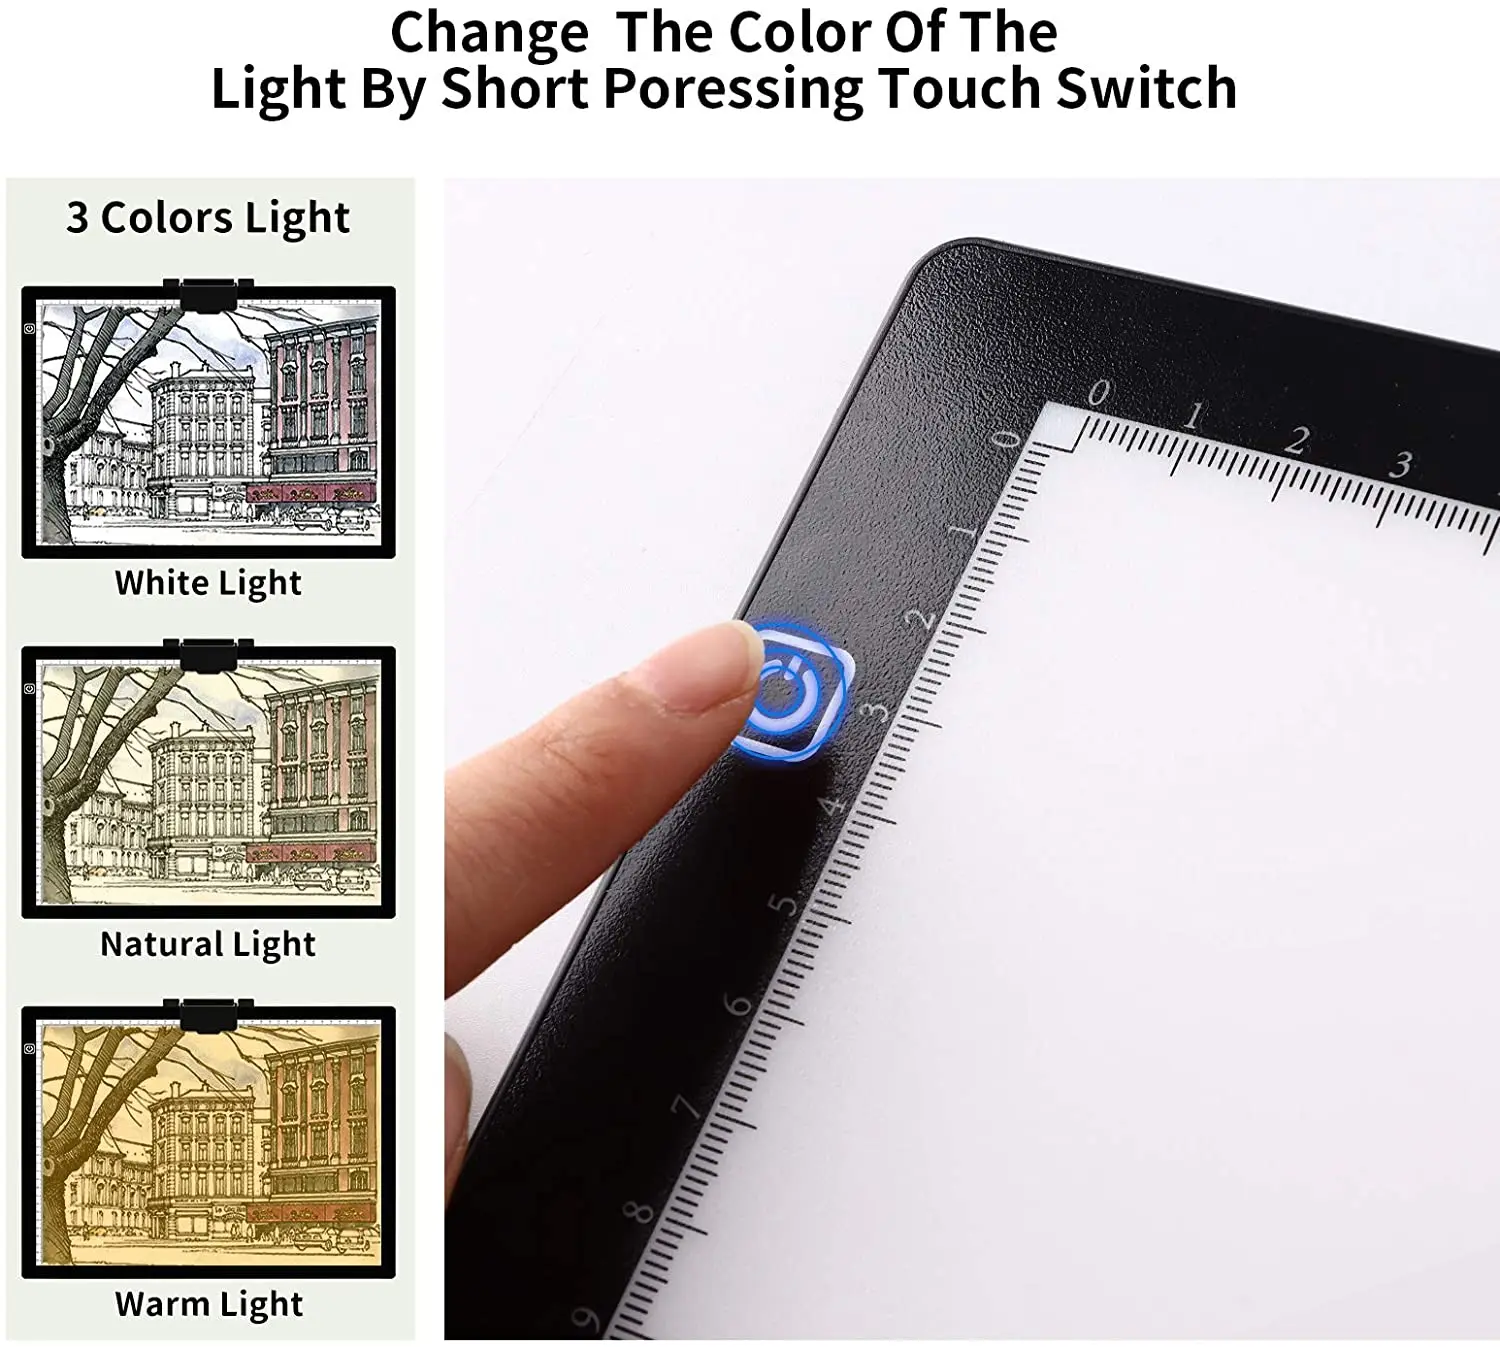 A3 USB Cable Tracing Light Board led light pad for Artists Drawing Diamond  Painting Stencilling Sketching Animation X-ray